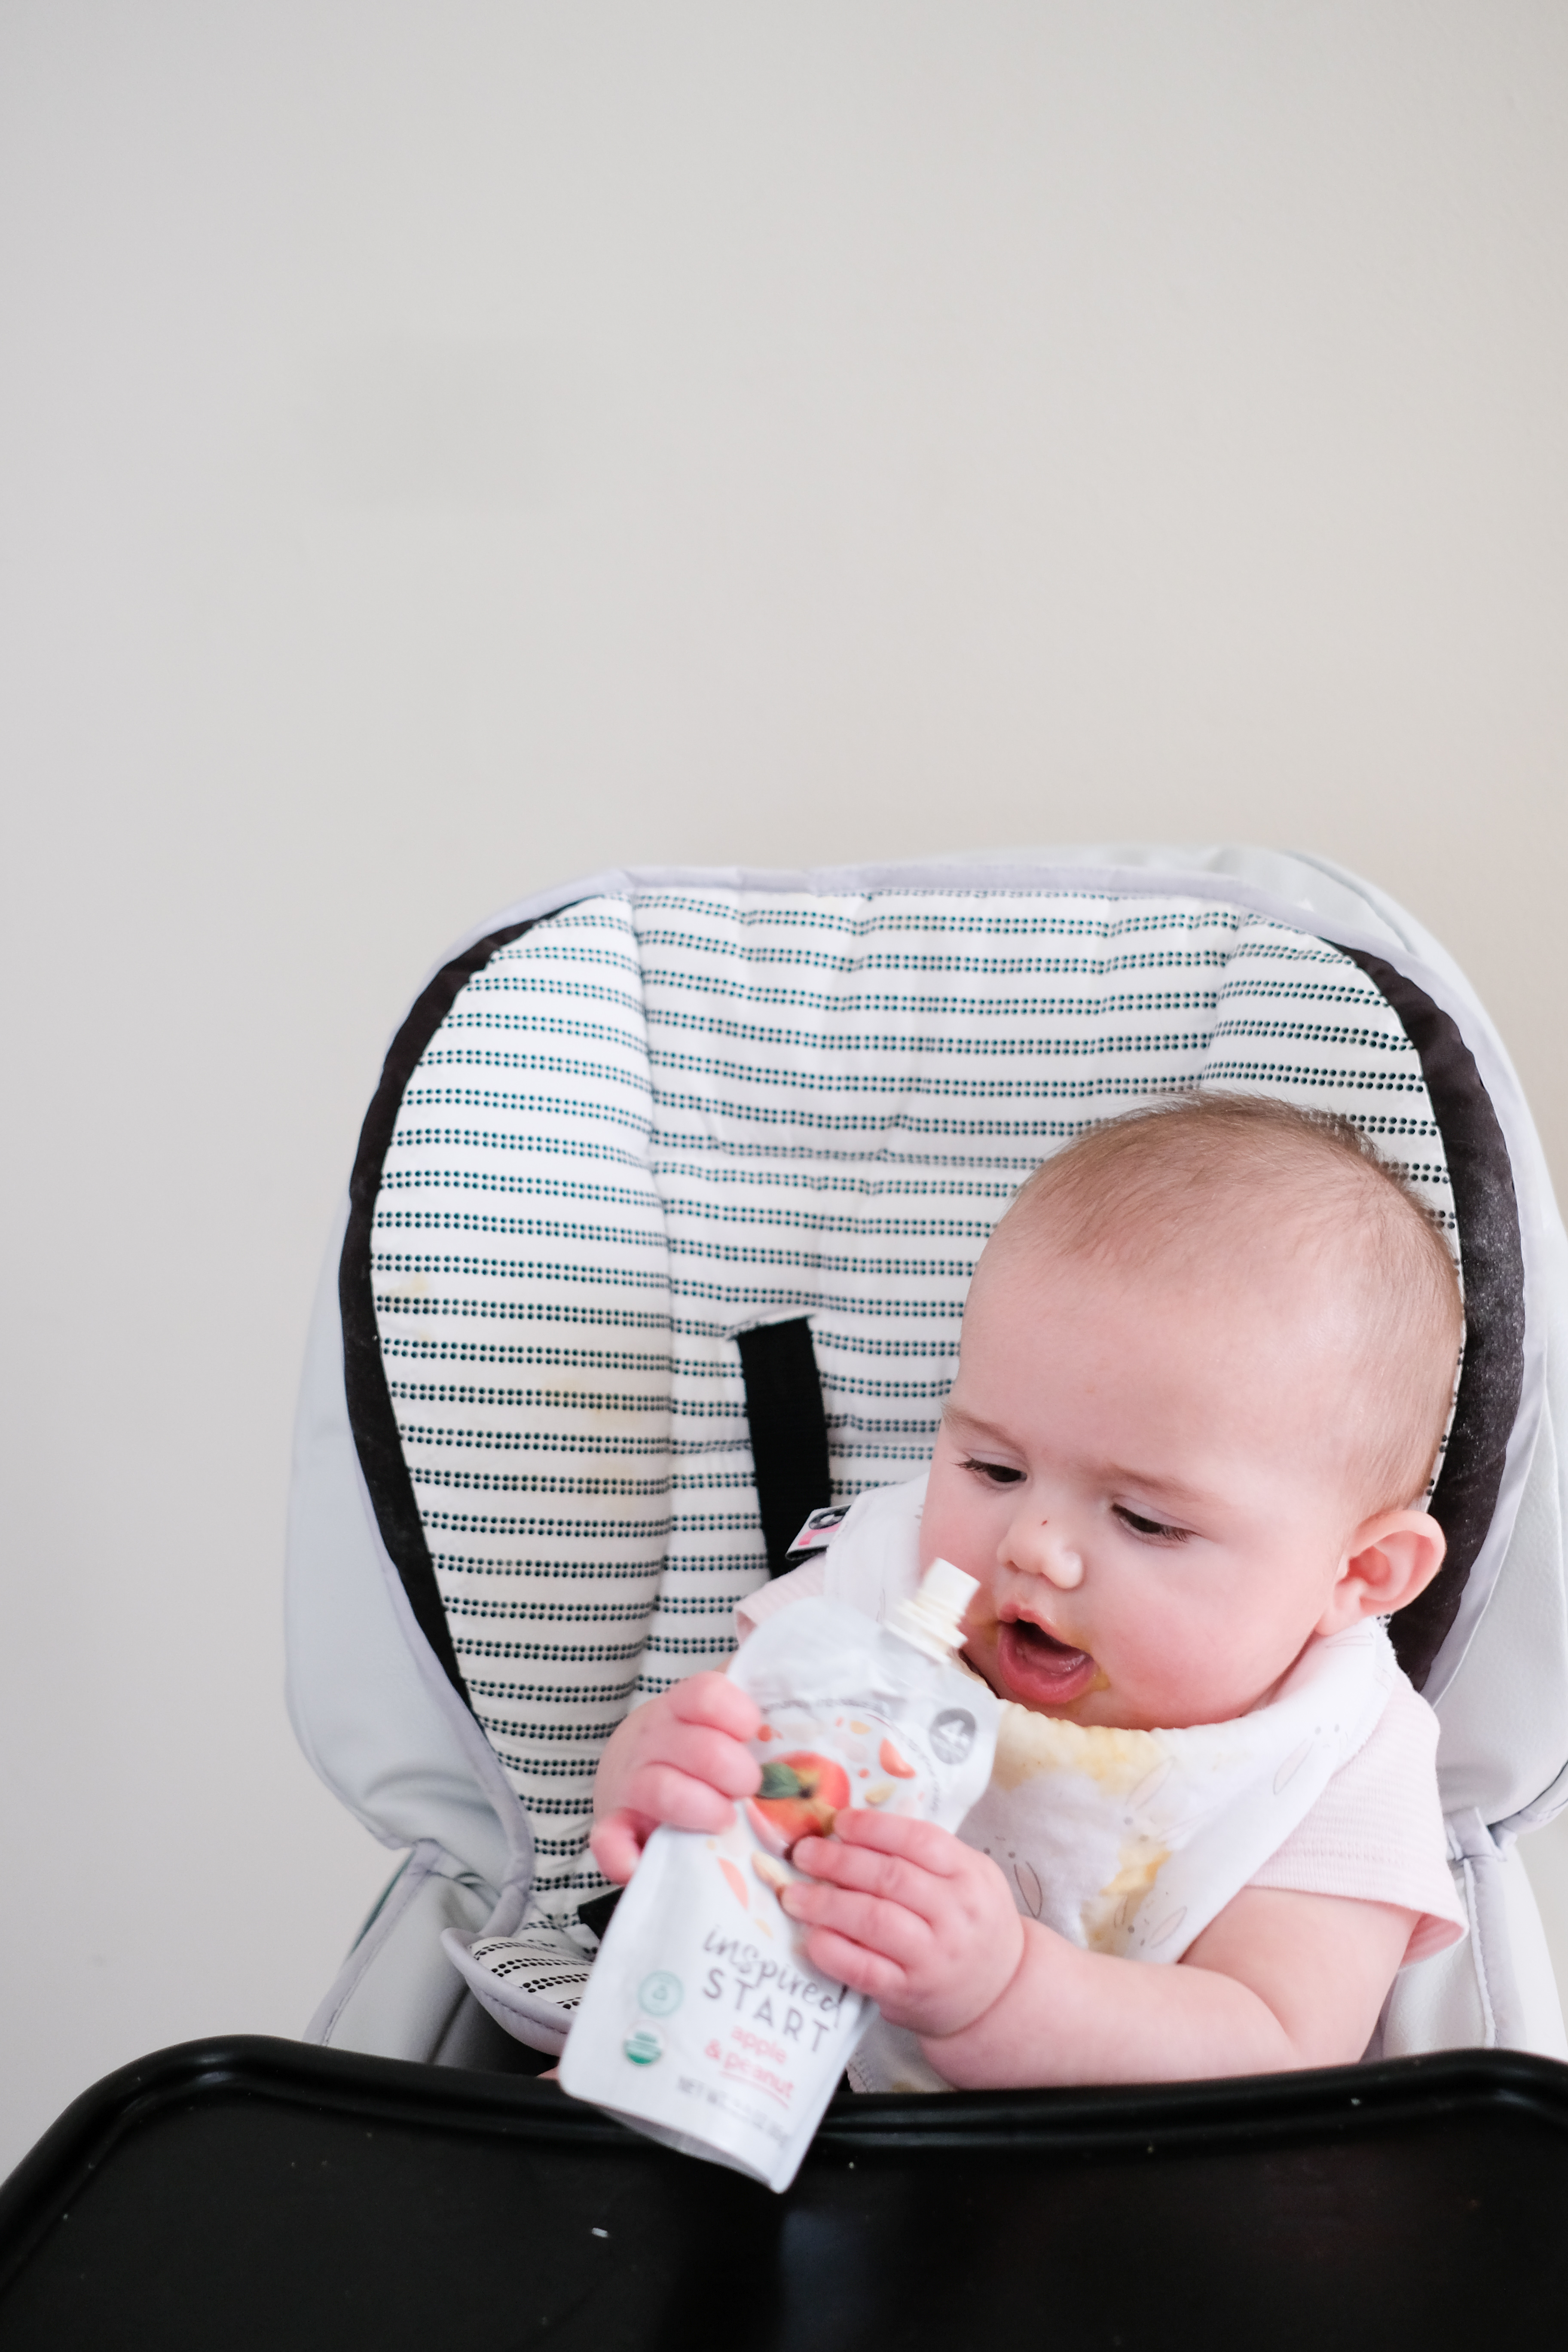 Lifestyle Blogger Chocolate & Lace shares how she is introducing early allergens to her baby with Inspired Start.